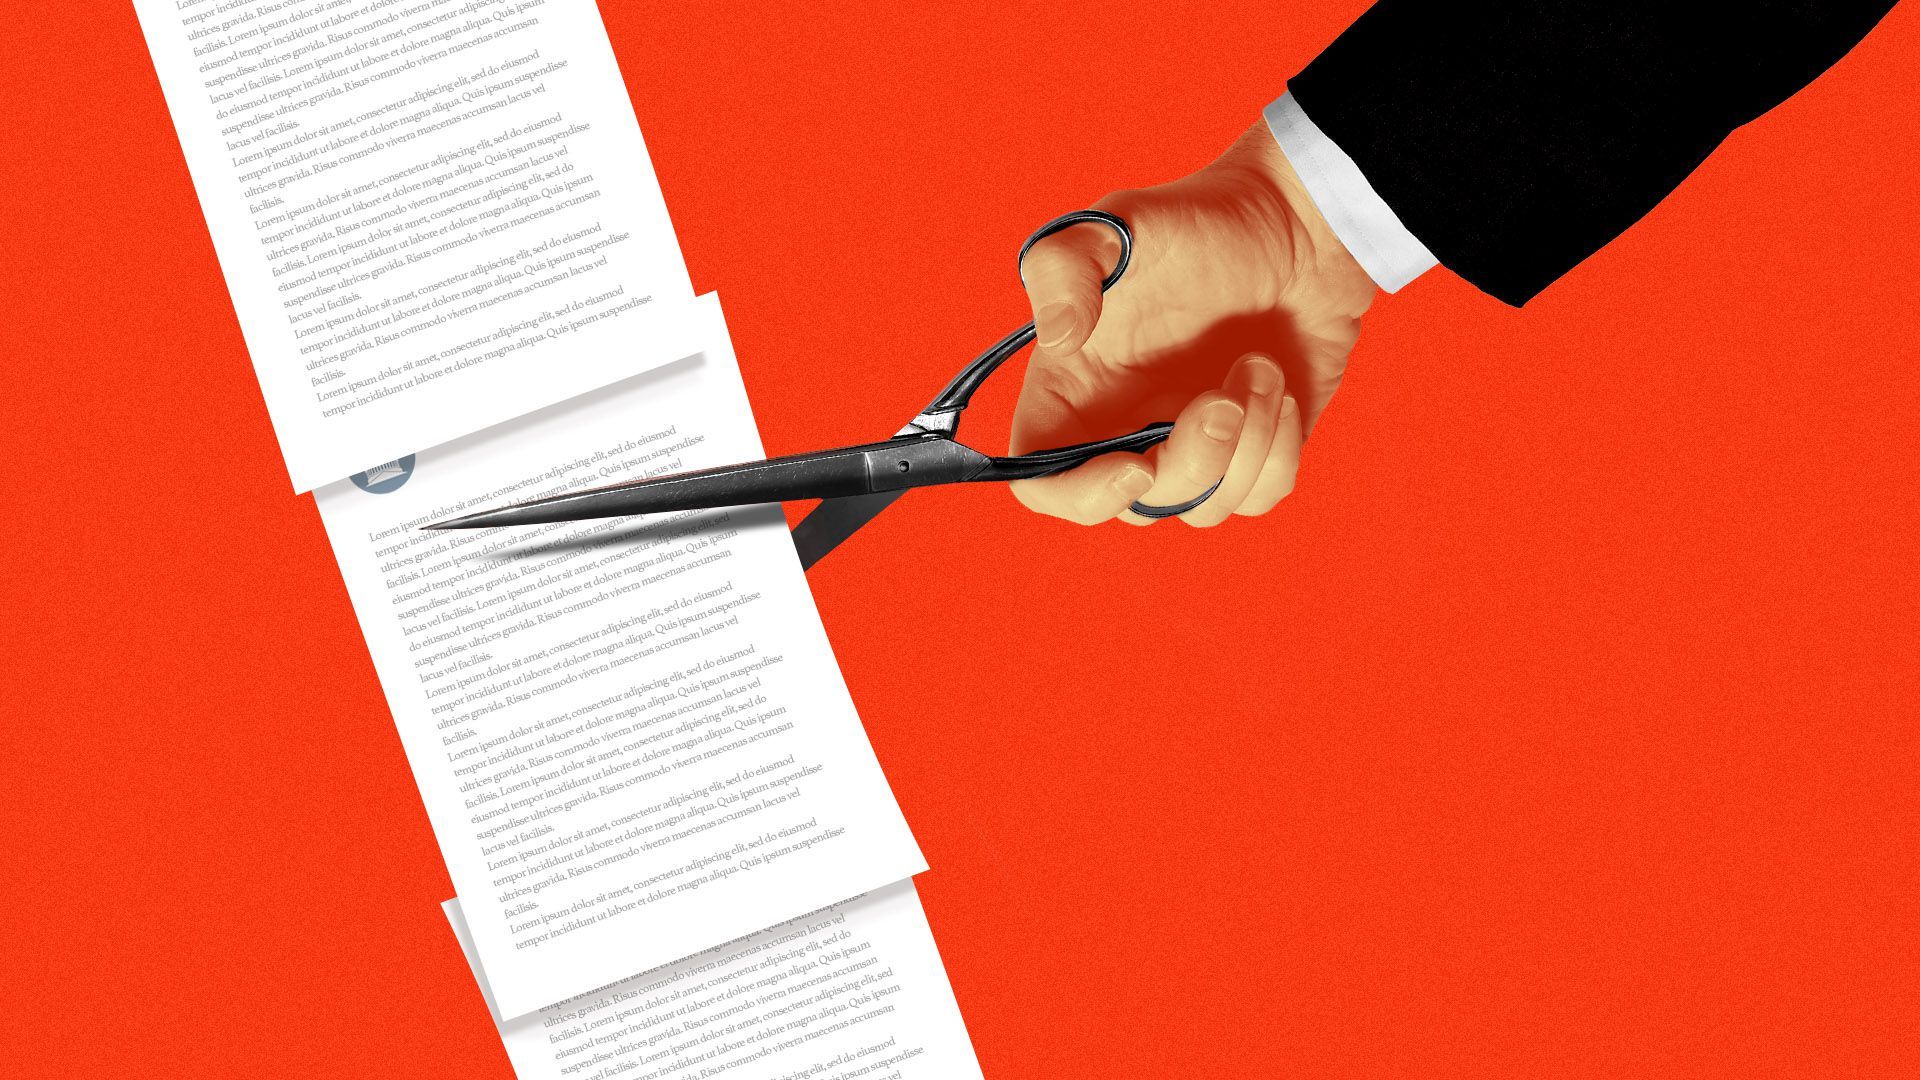 Illustration of a hand in a suit with scissors about to cut a line of papers from a House bill